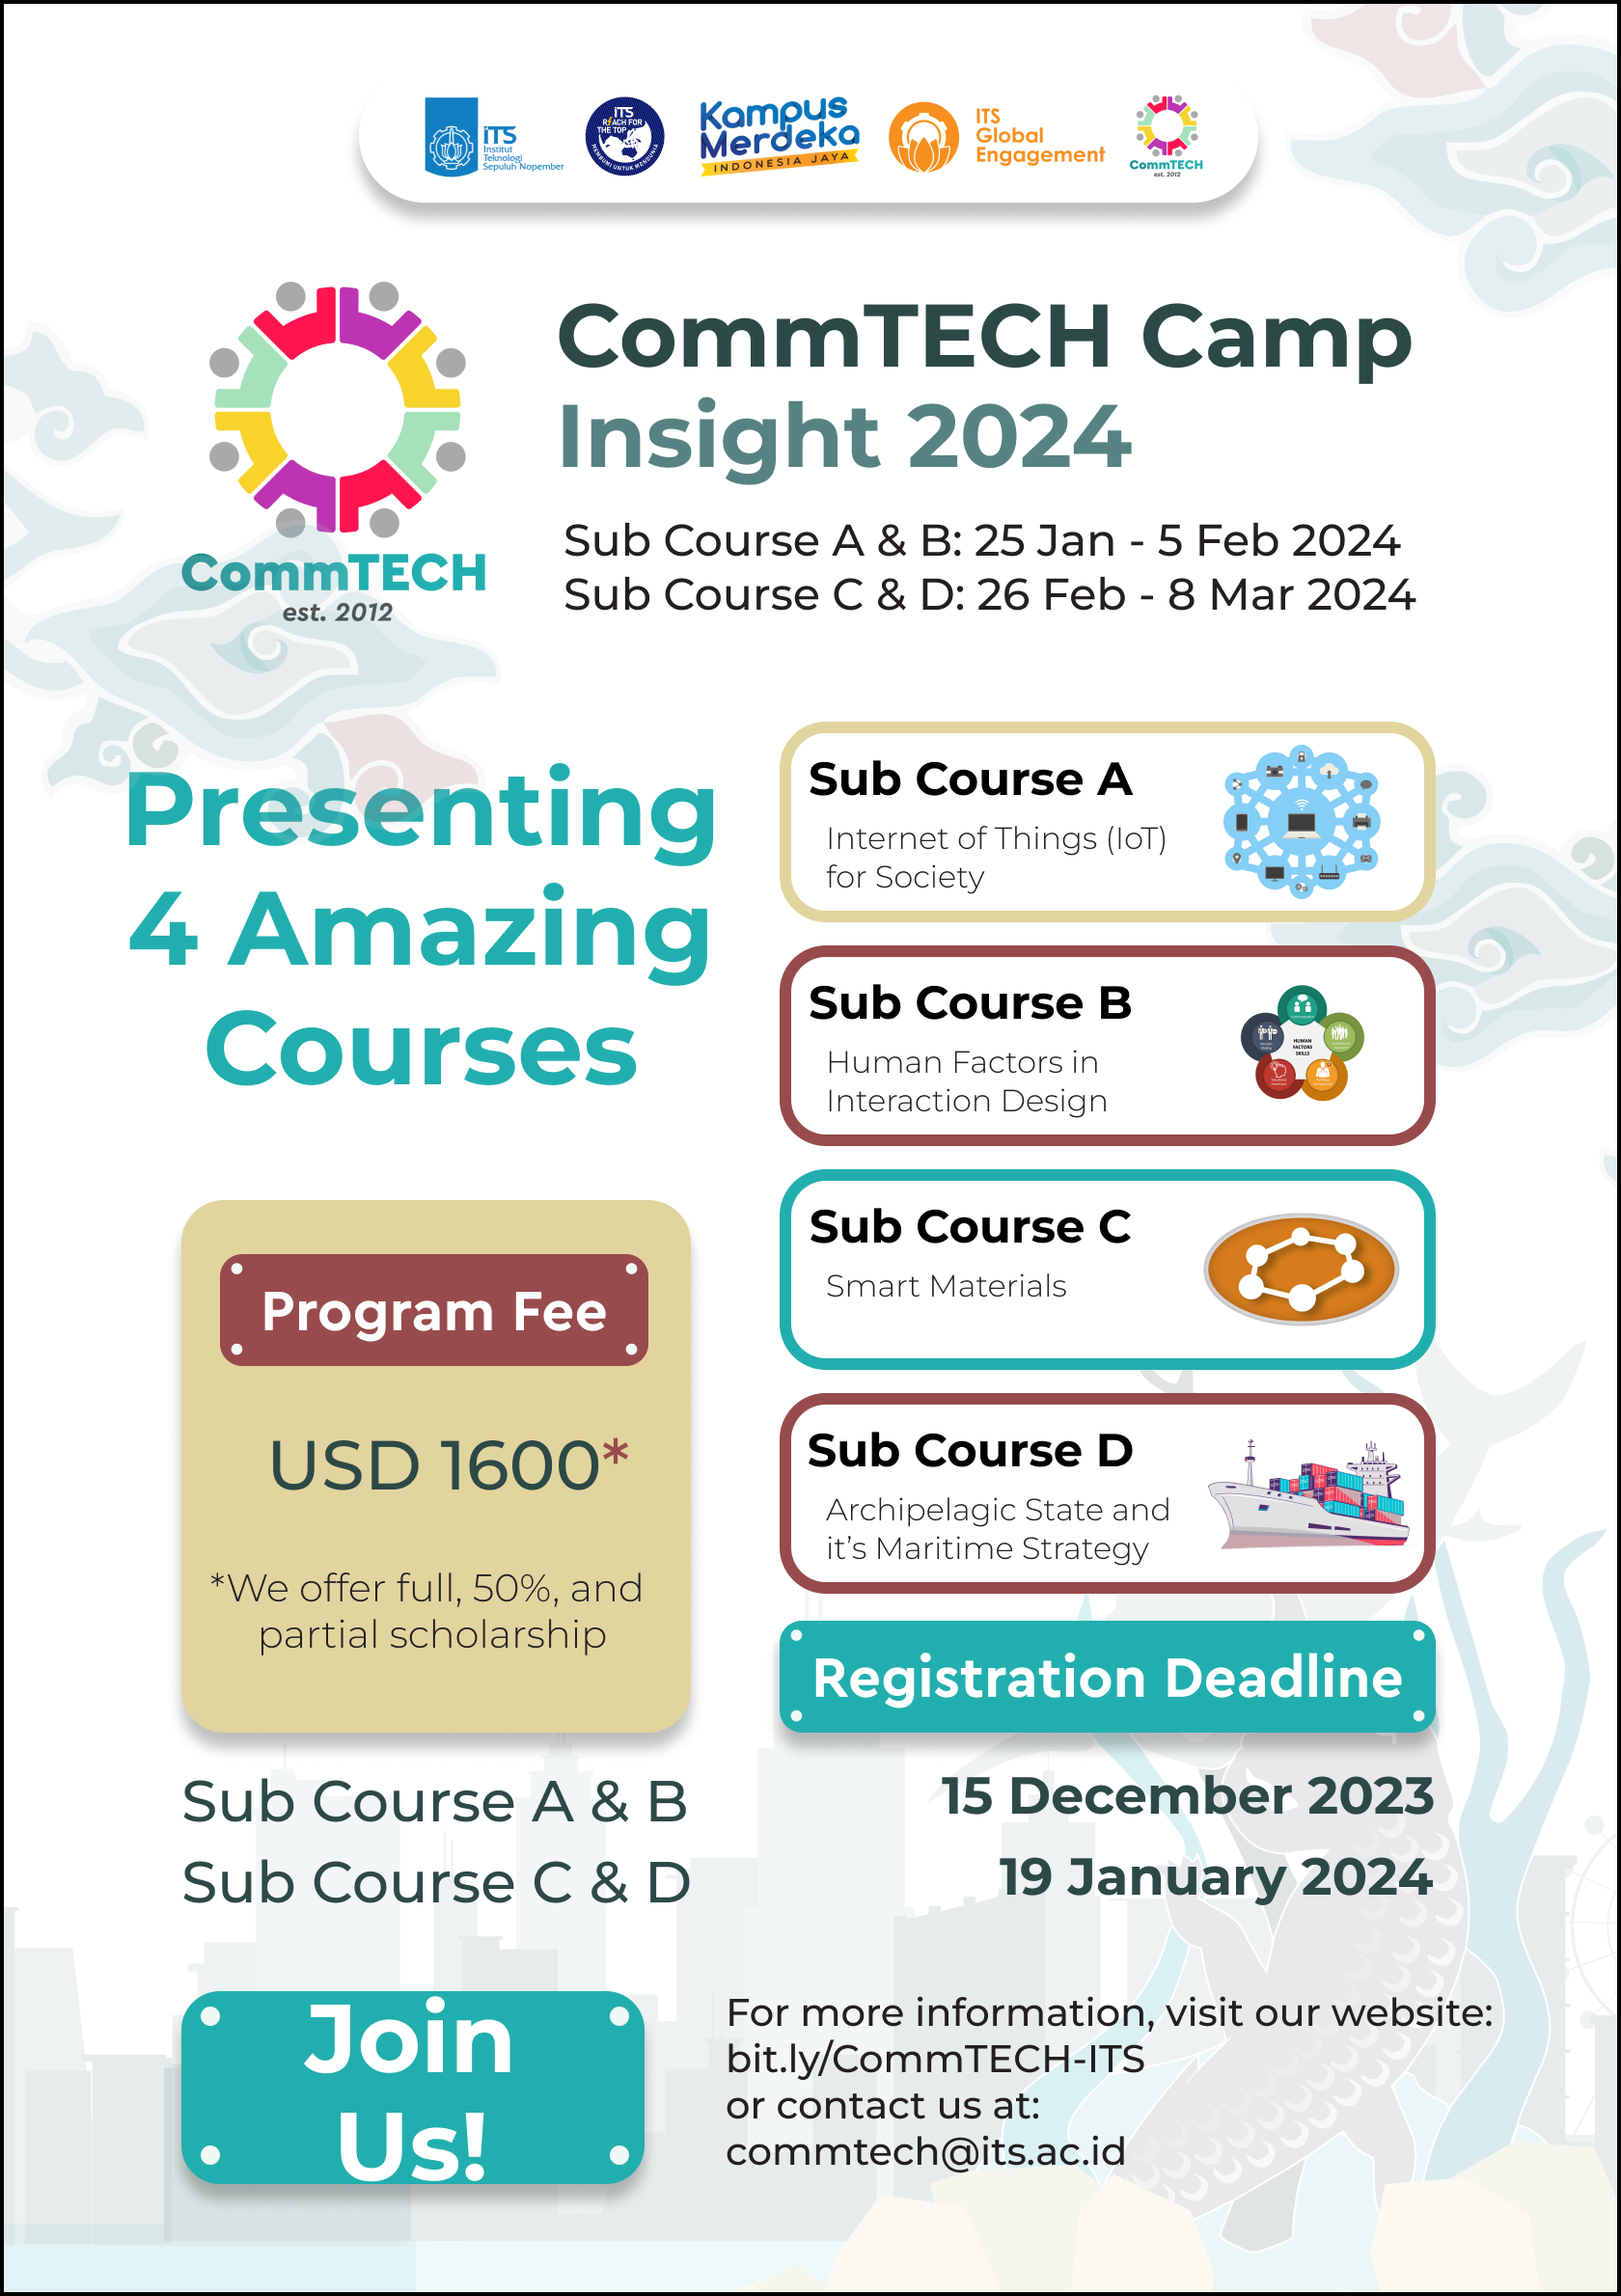 CALL FOR PARTICIPANTS: CommTECH Camp Insight 2024 “Solving Local Problems with Global Knowledge”